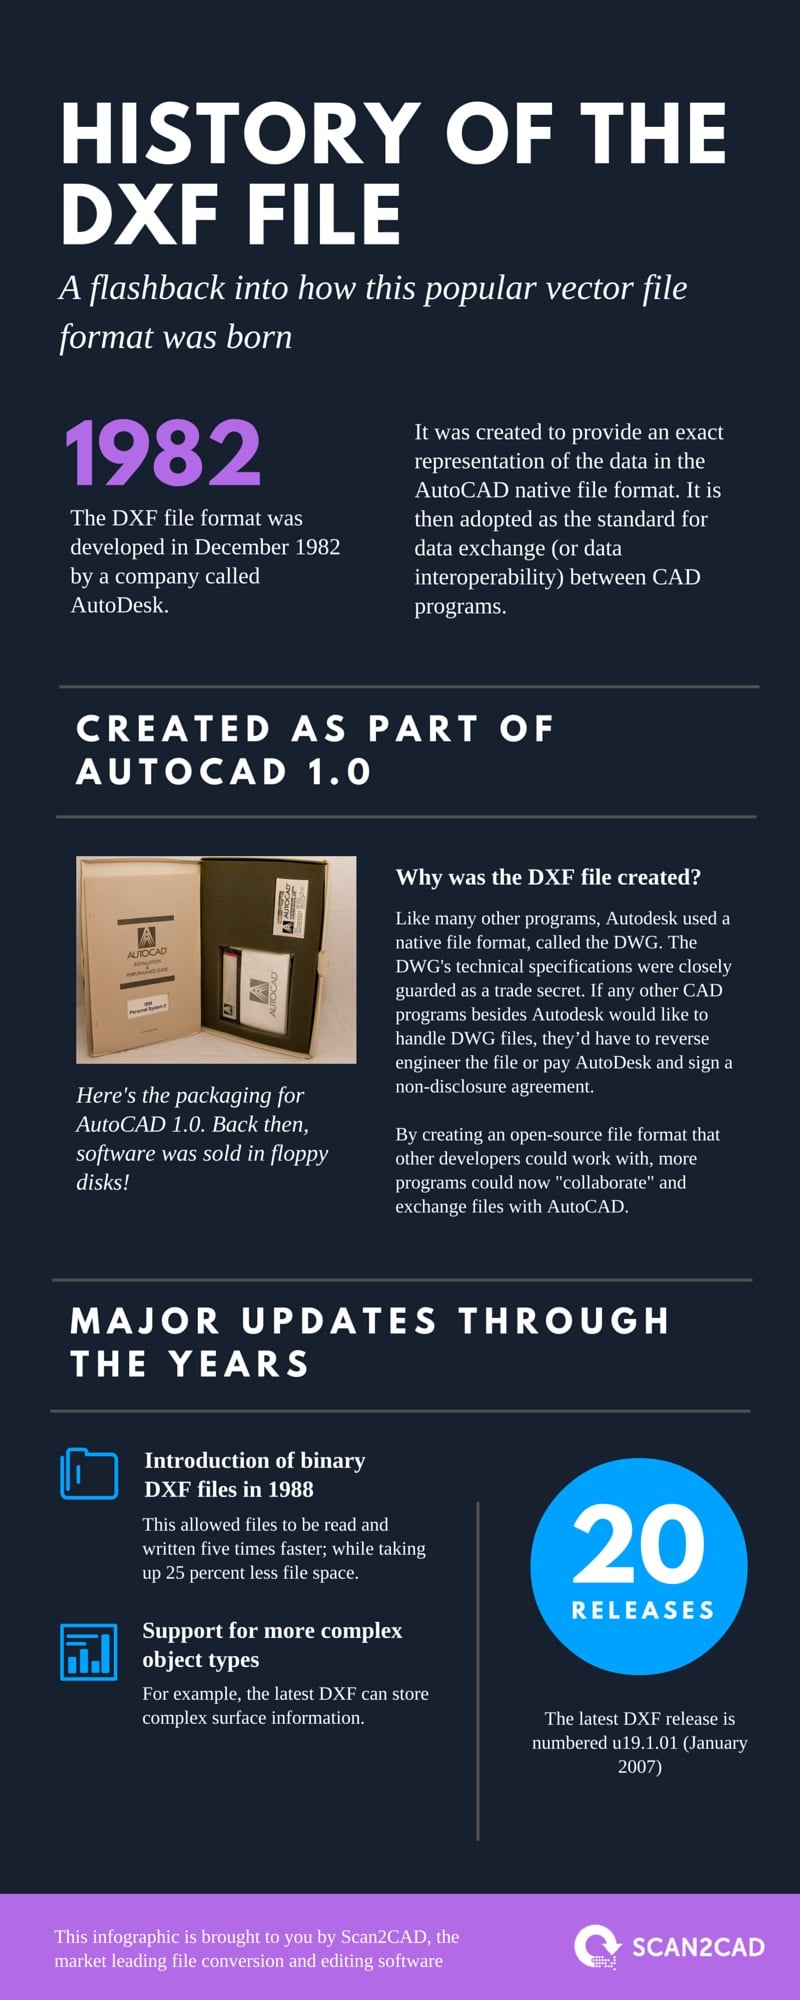 History of DXF File format - infographic by Scan2CAD